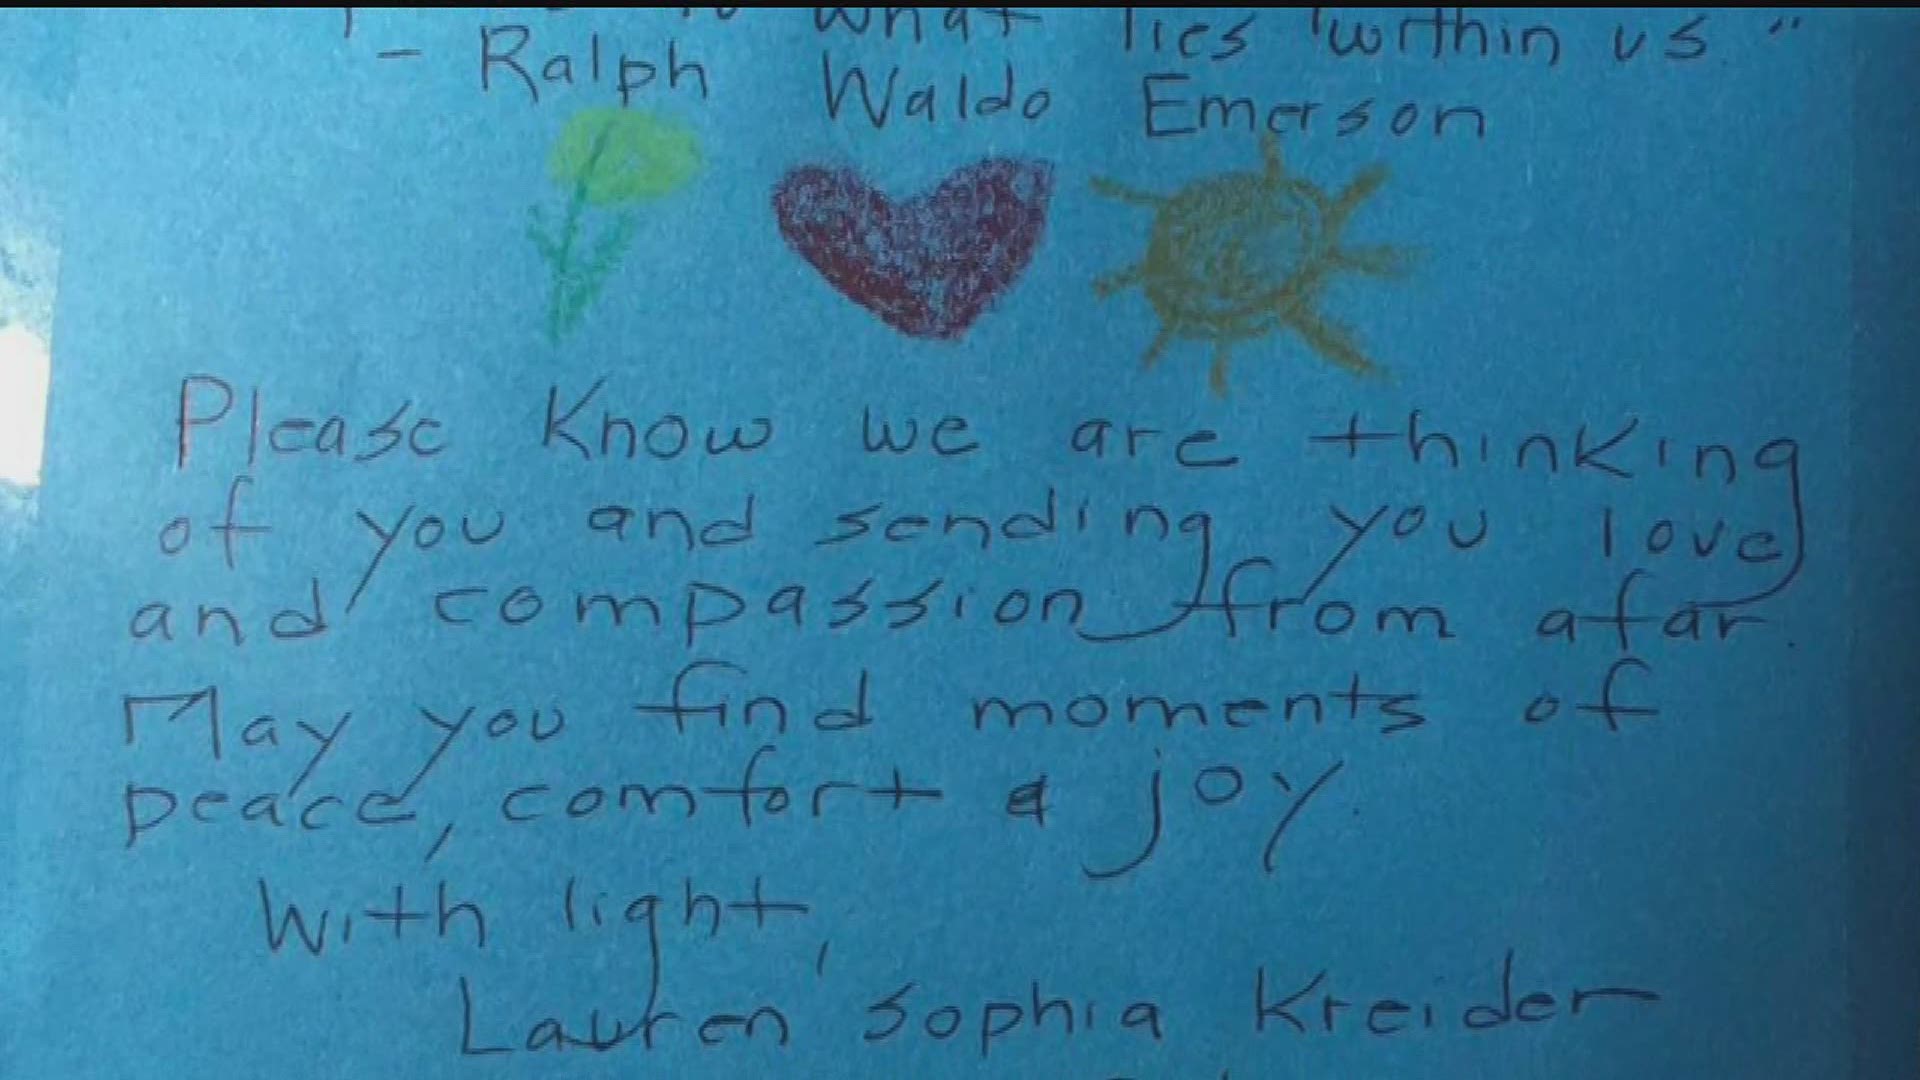 Lancaster mom and her son writes cards to patients and staff at Lancaster General Hospital.